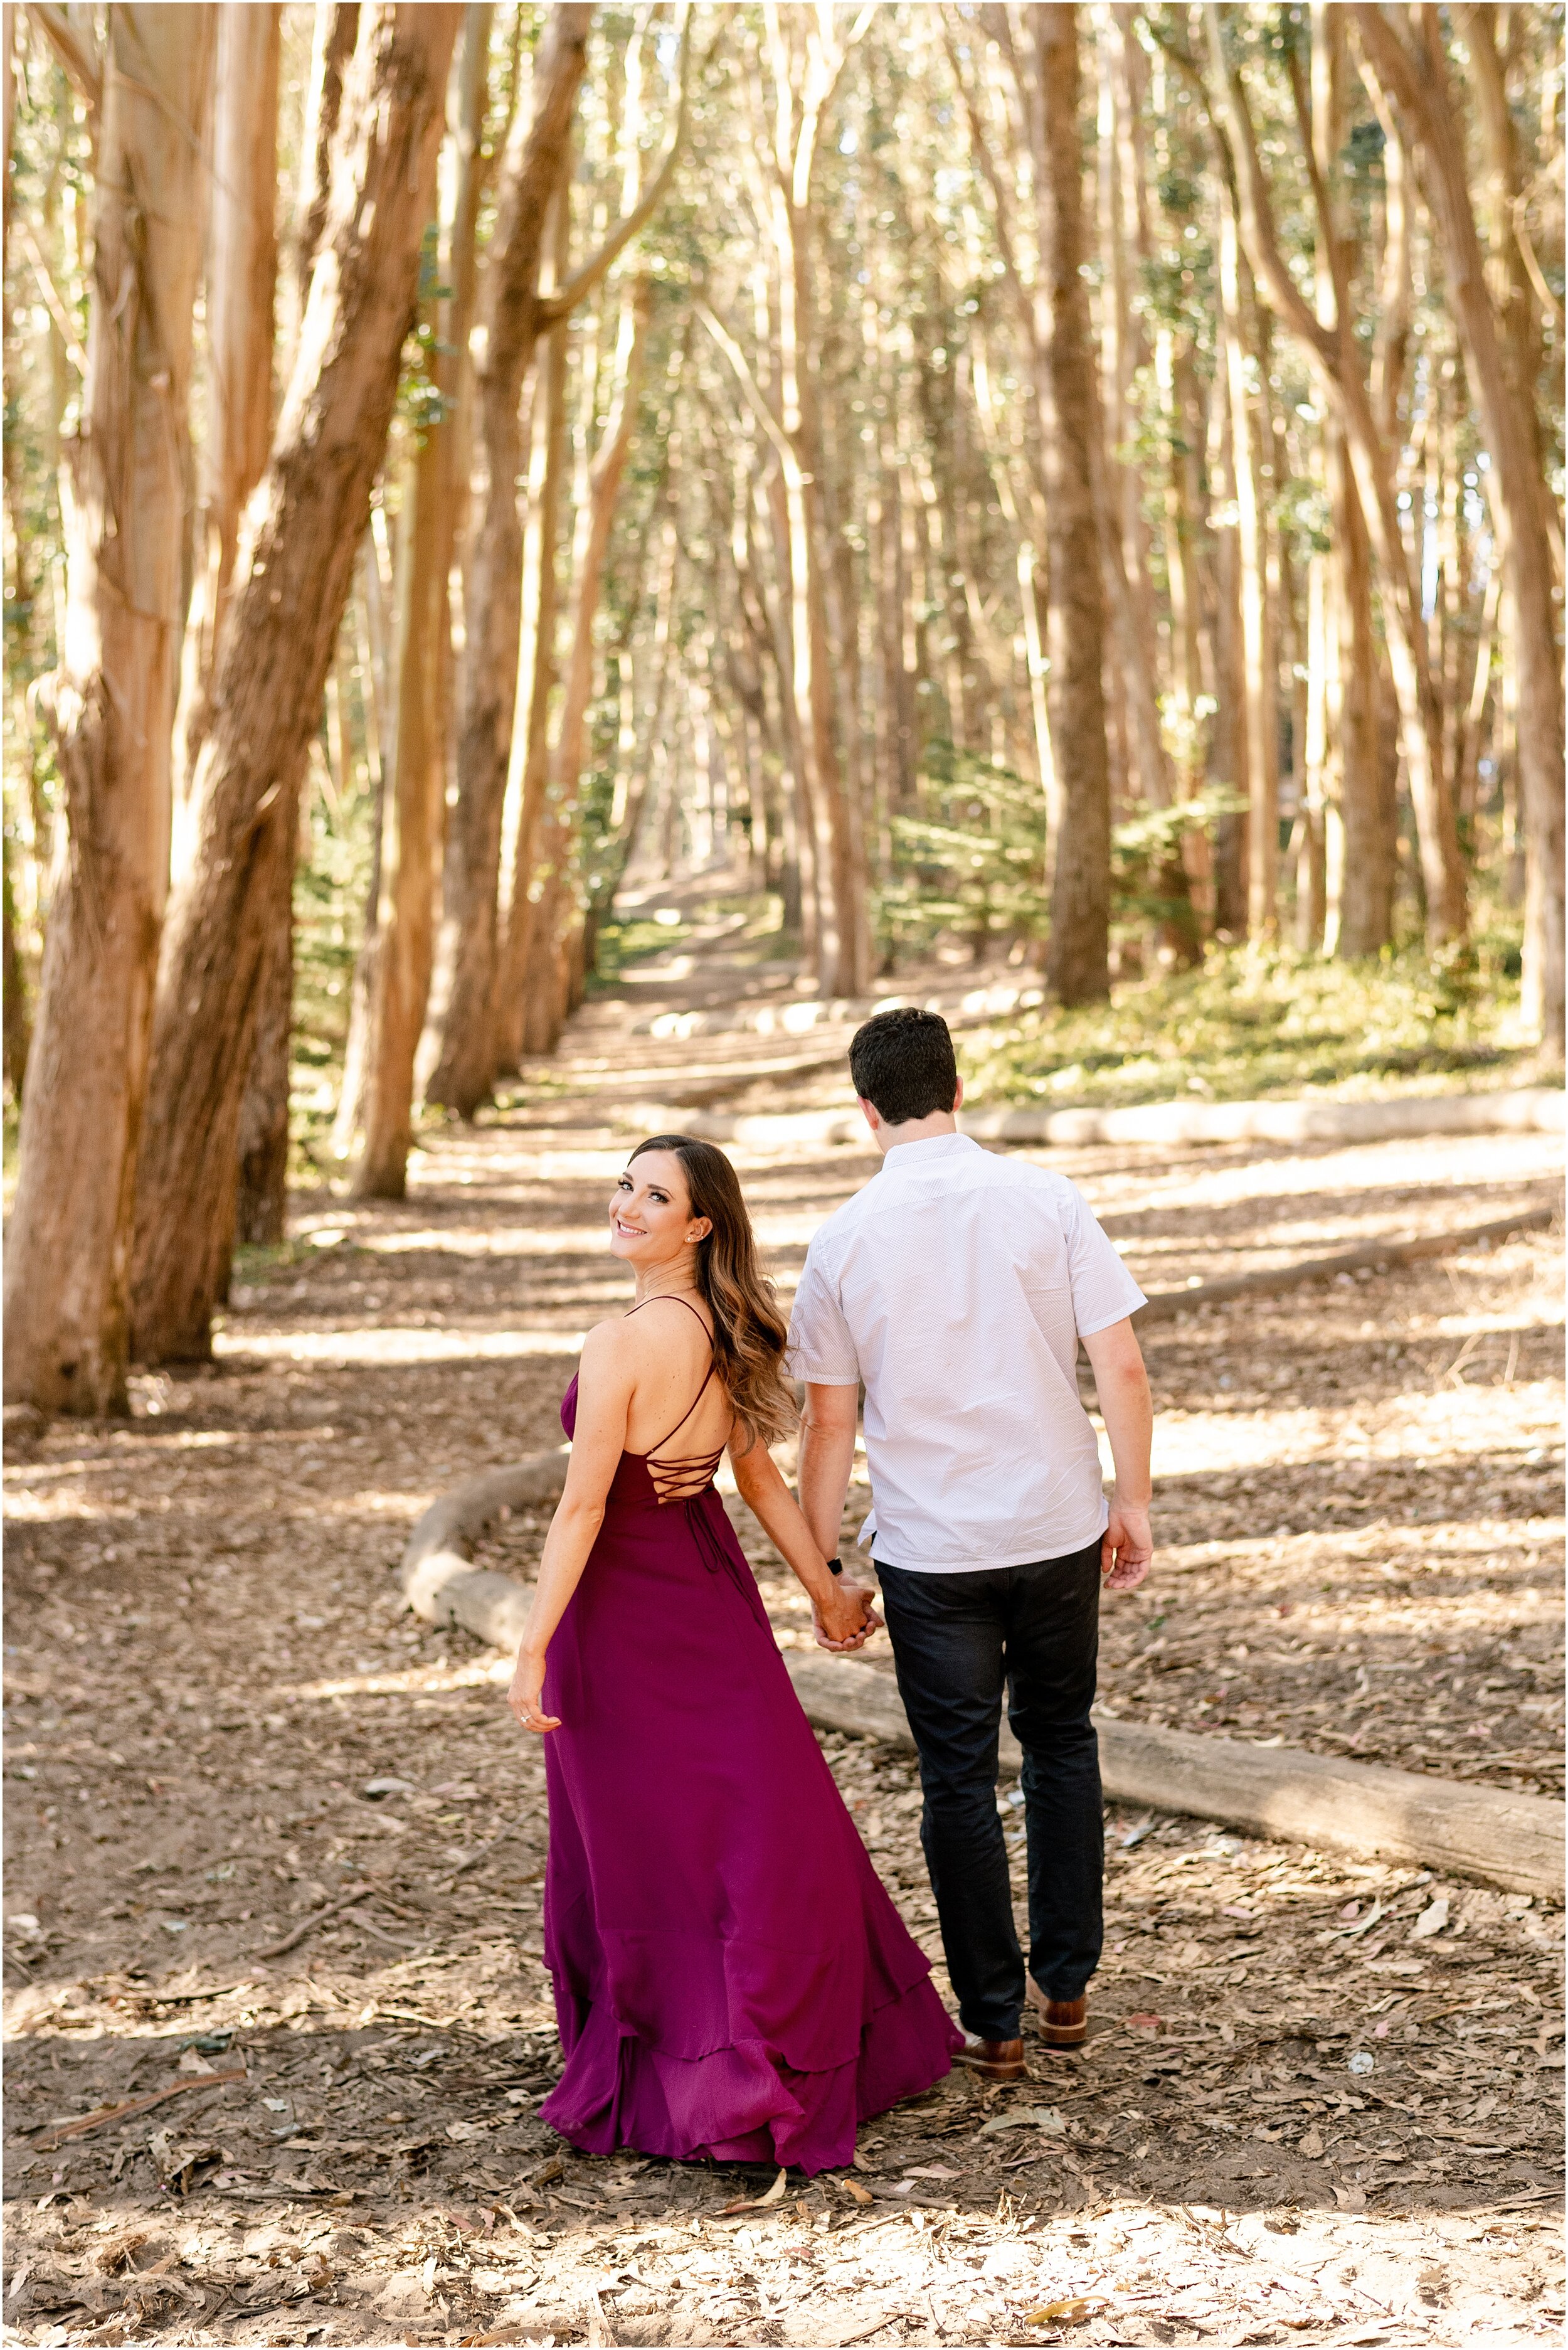 hannah leigh photography Baker Beach, Lovers Lane. Palace of Fine Arts Engagement Session San Franscico, CA_4829.jpg